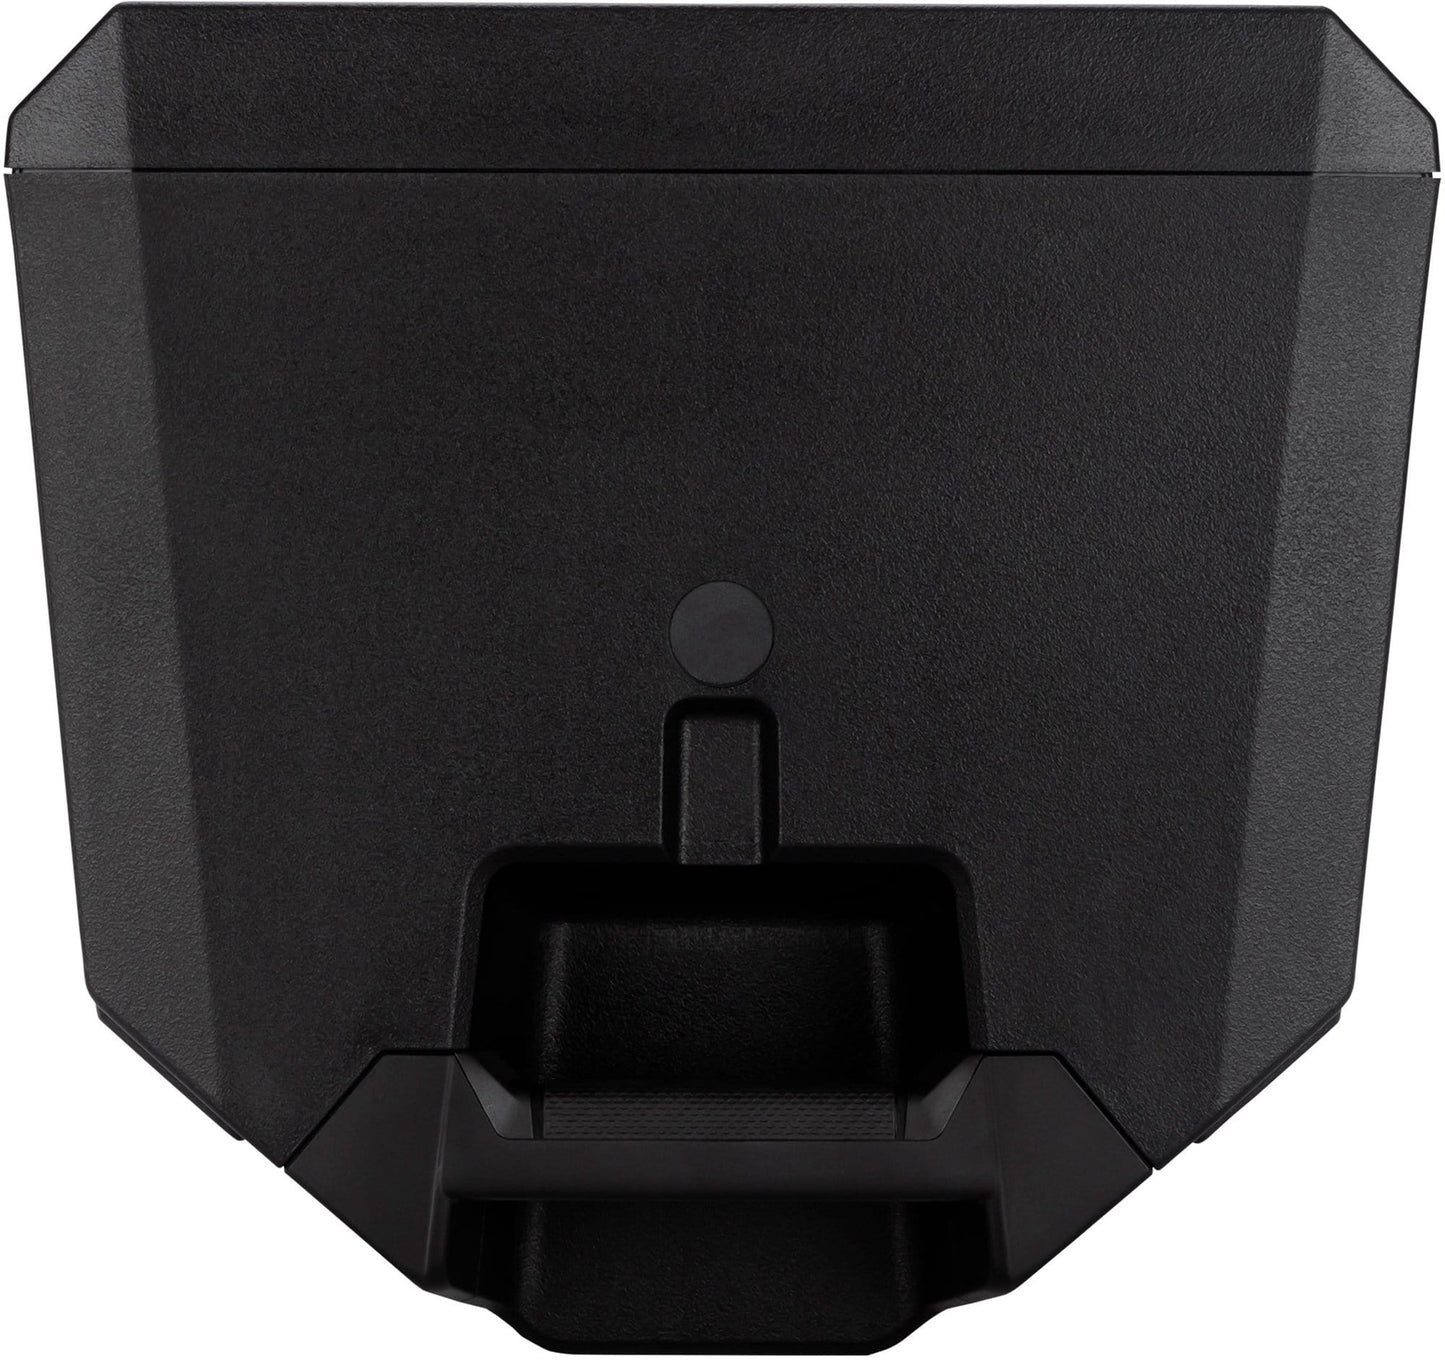 RCF ART-912A 12-Inch 2-Way 2100W Powered Speaker - PSSL ProSound and Stage Lighting